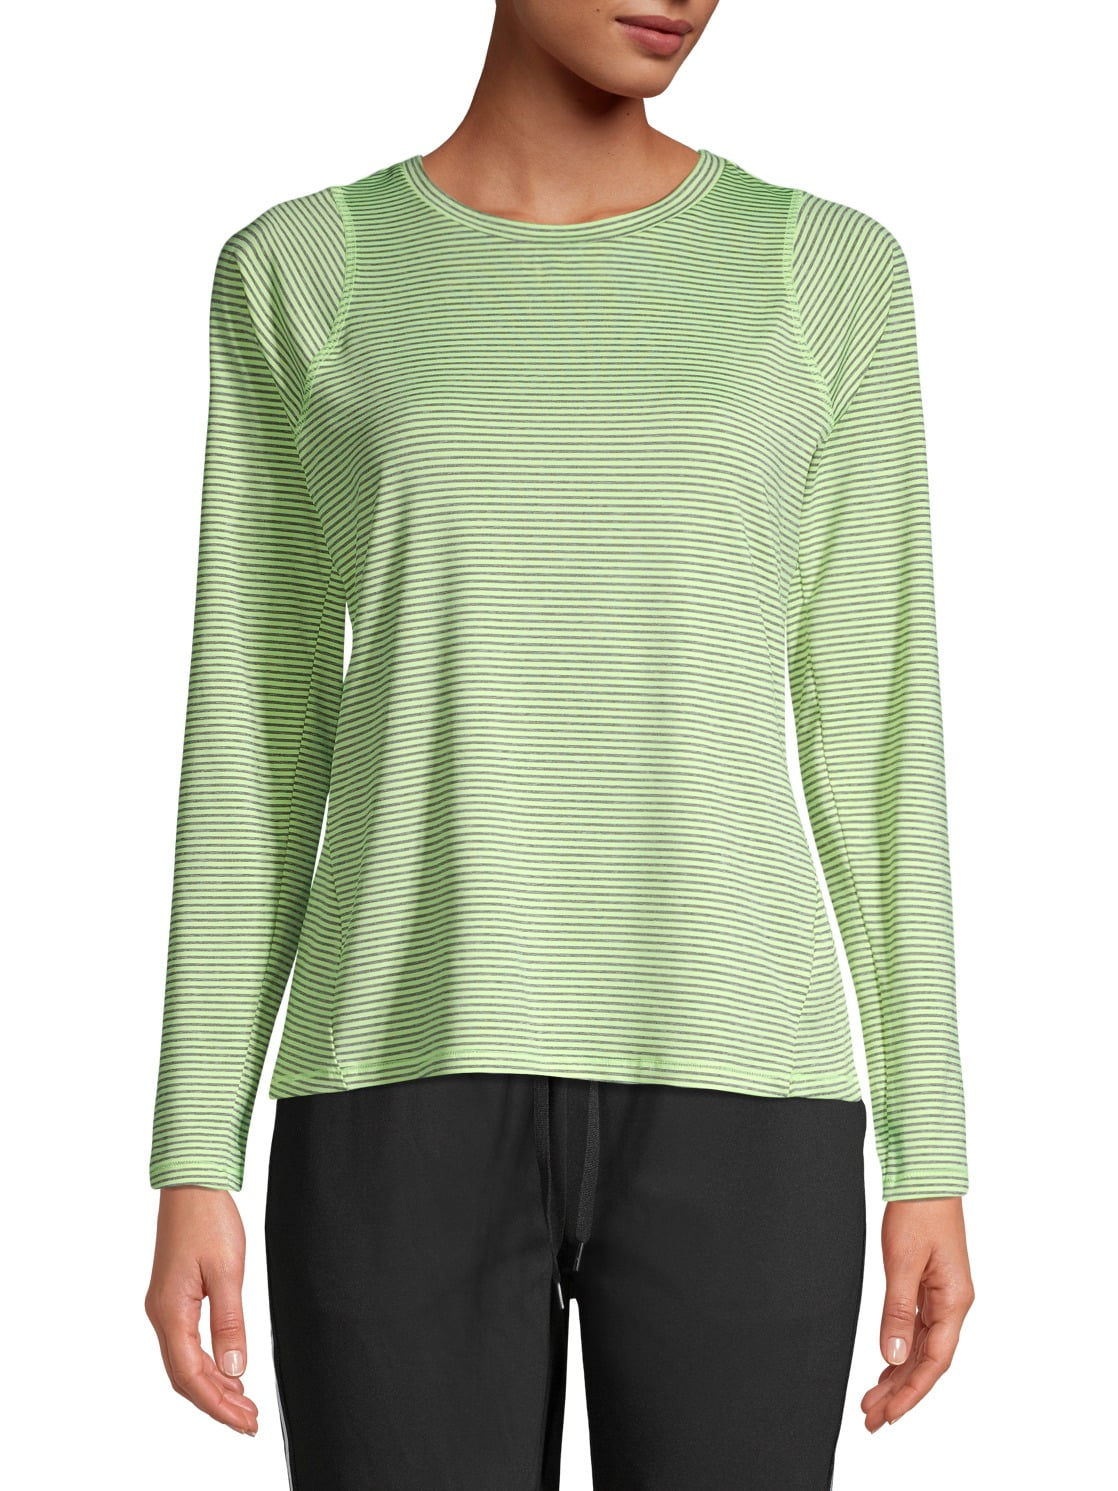 Athletic Works Women's Active Performance Long Sleeve Crewneck Commuter ...